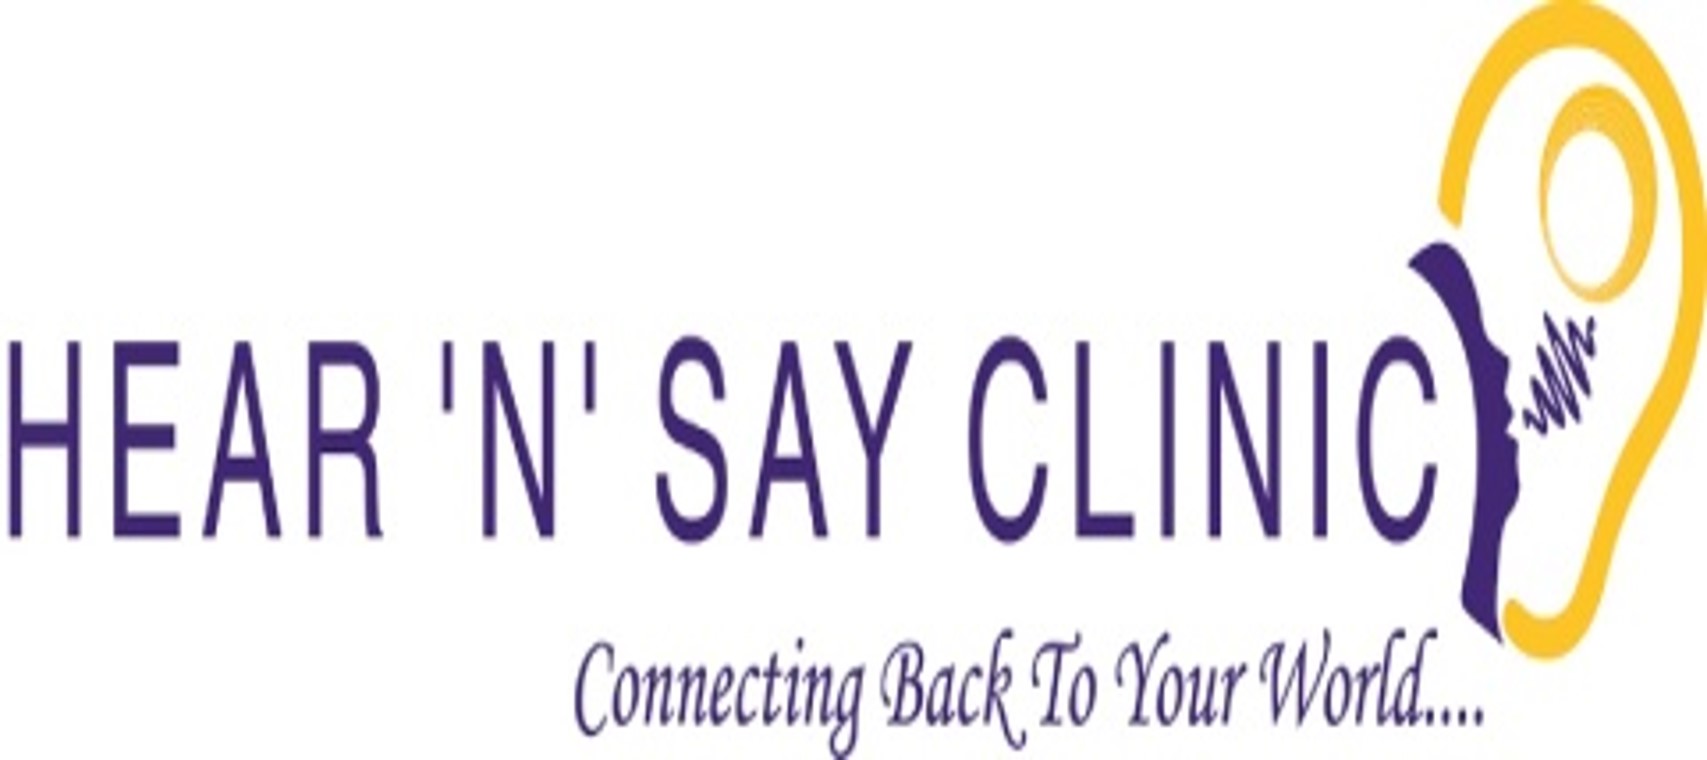 Hear 'N' Say Clinic - Connecting Back to your world